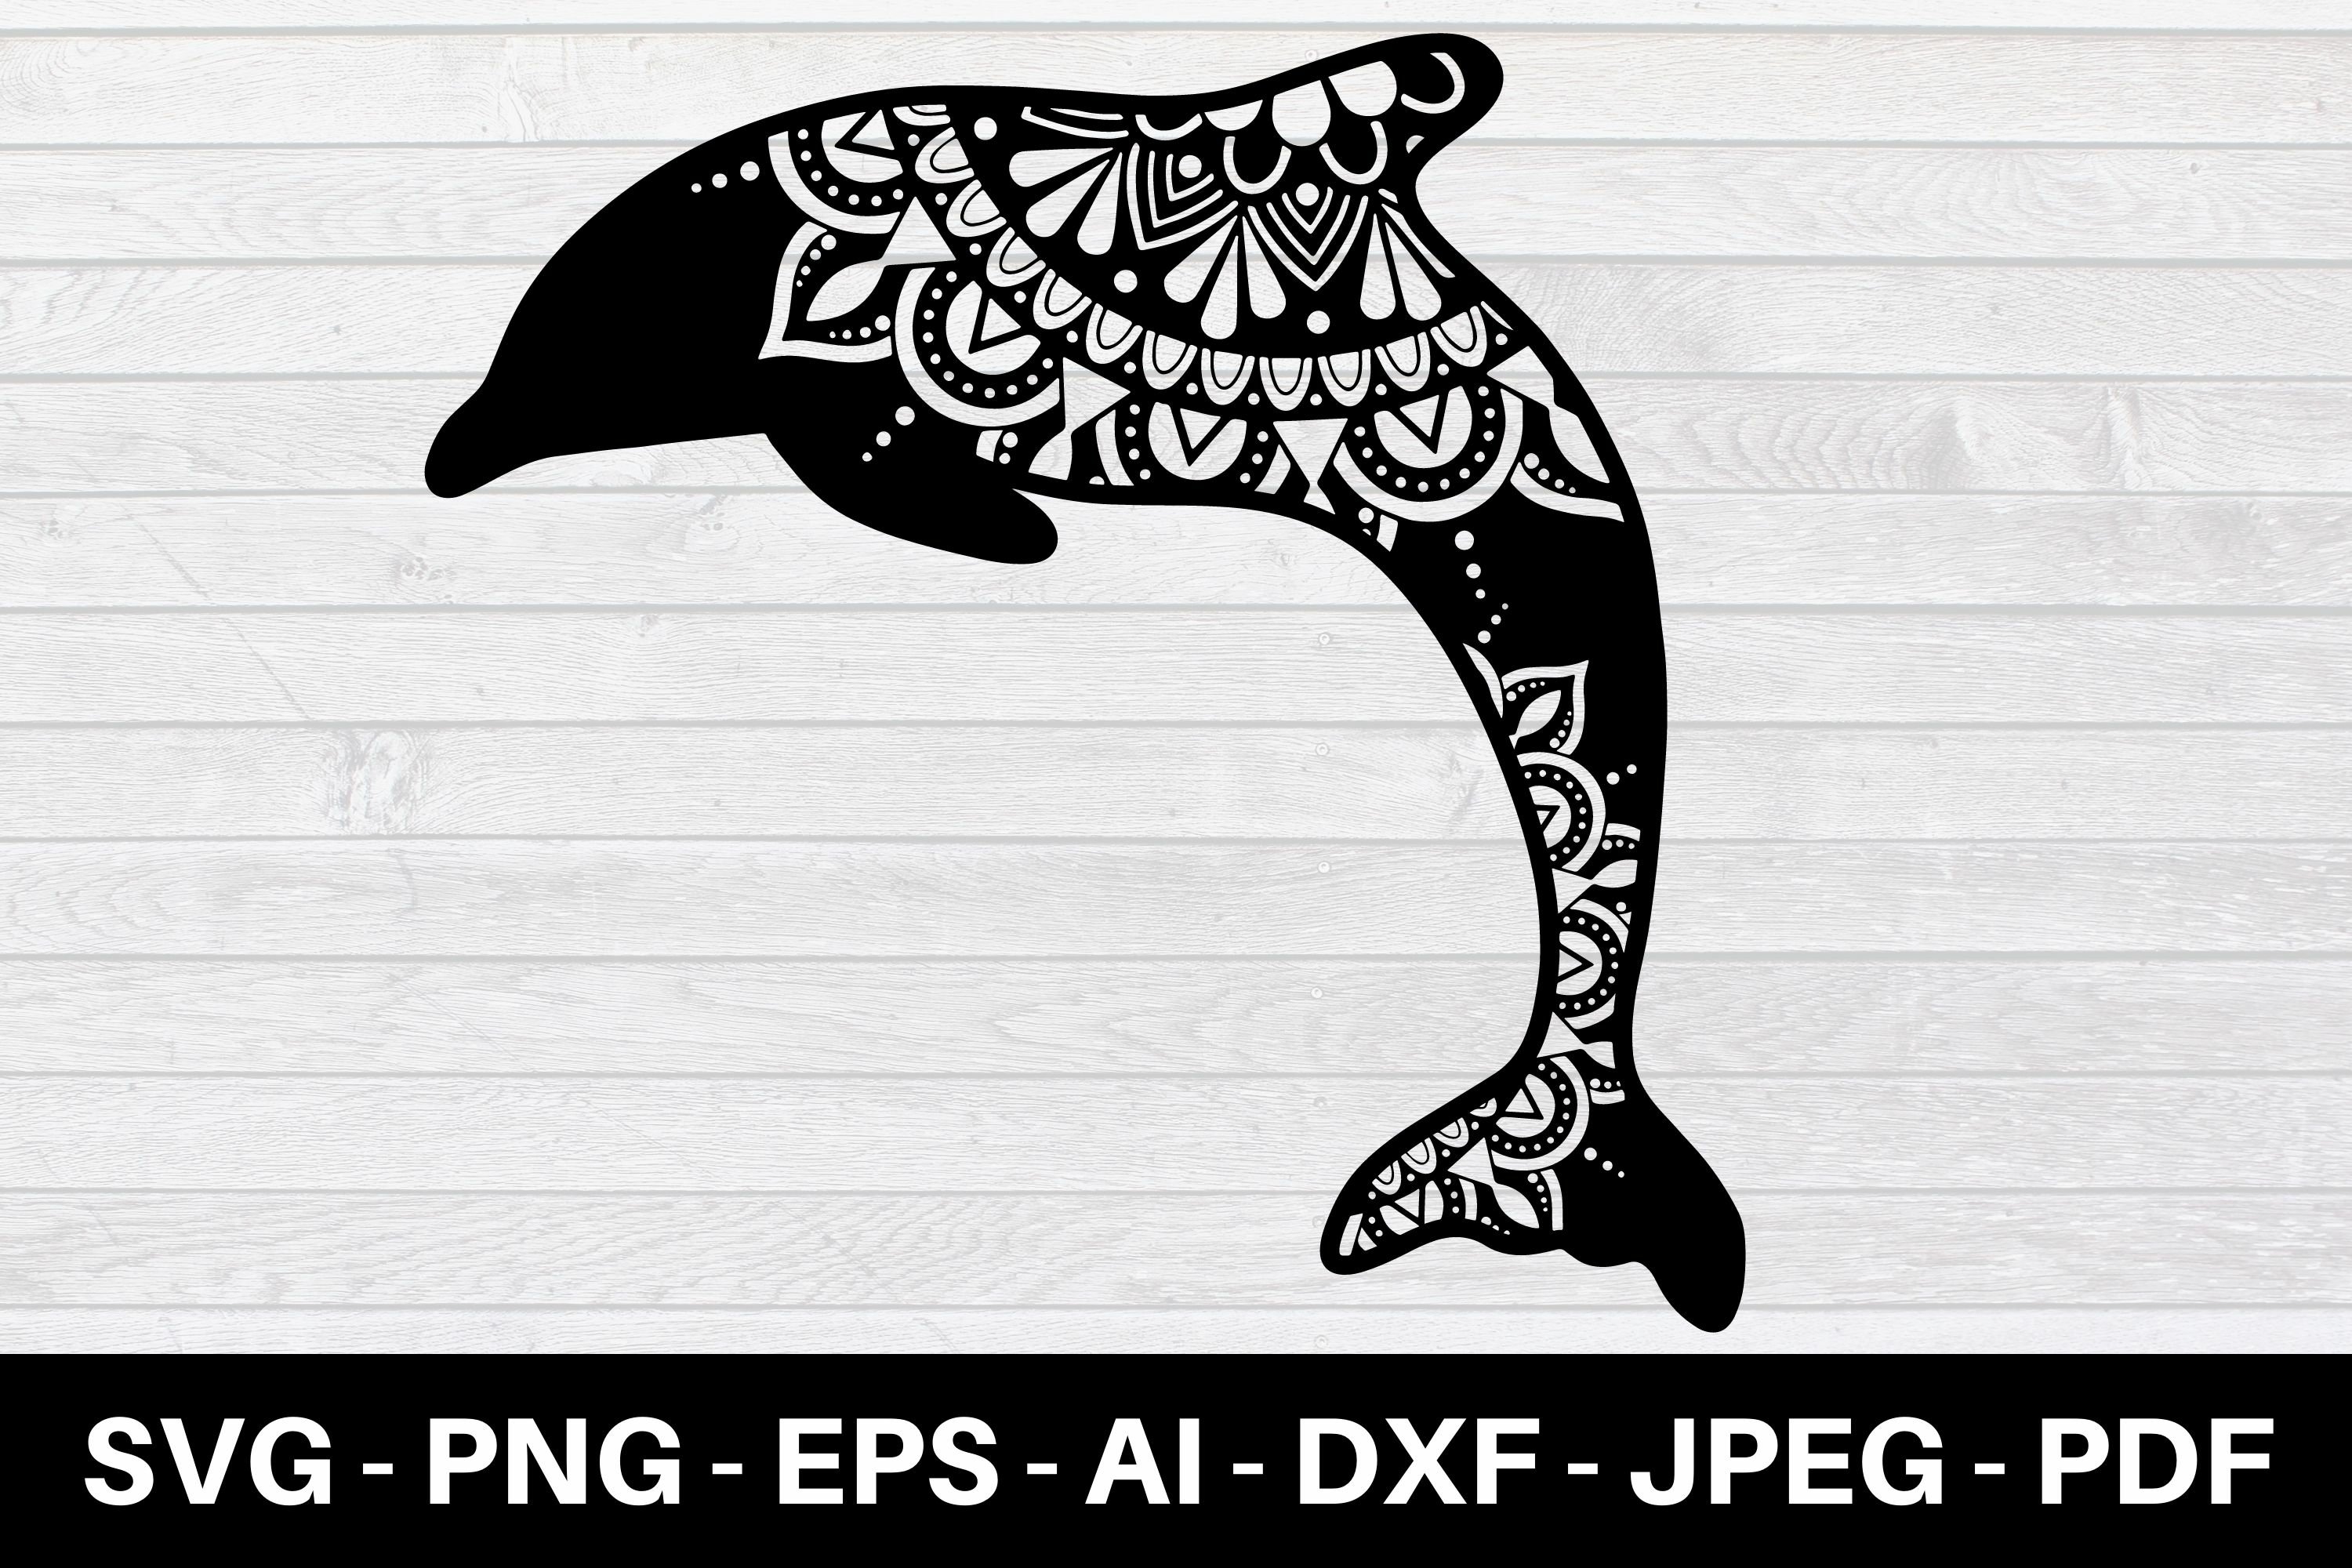 Dolphin jumping out of the water with a pattern on it.